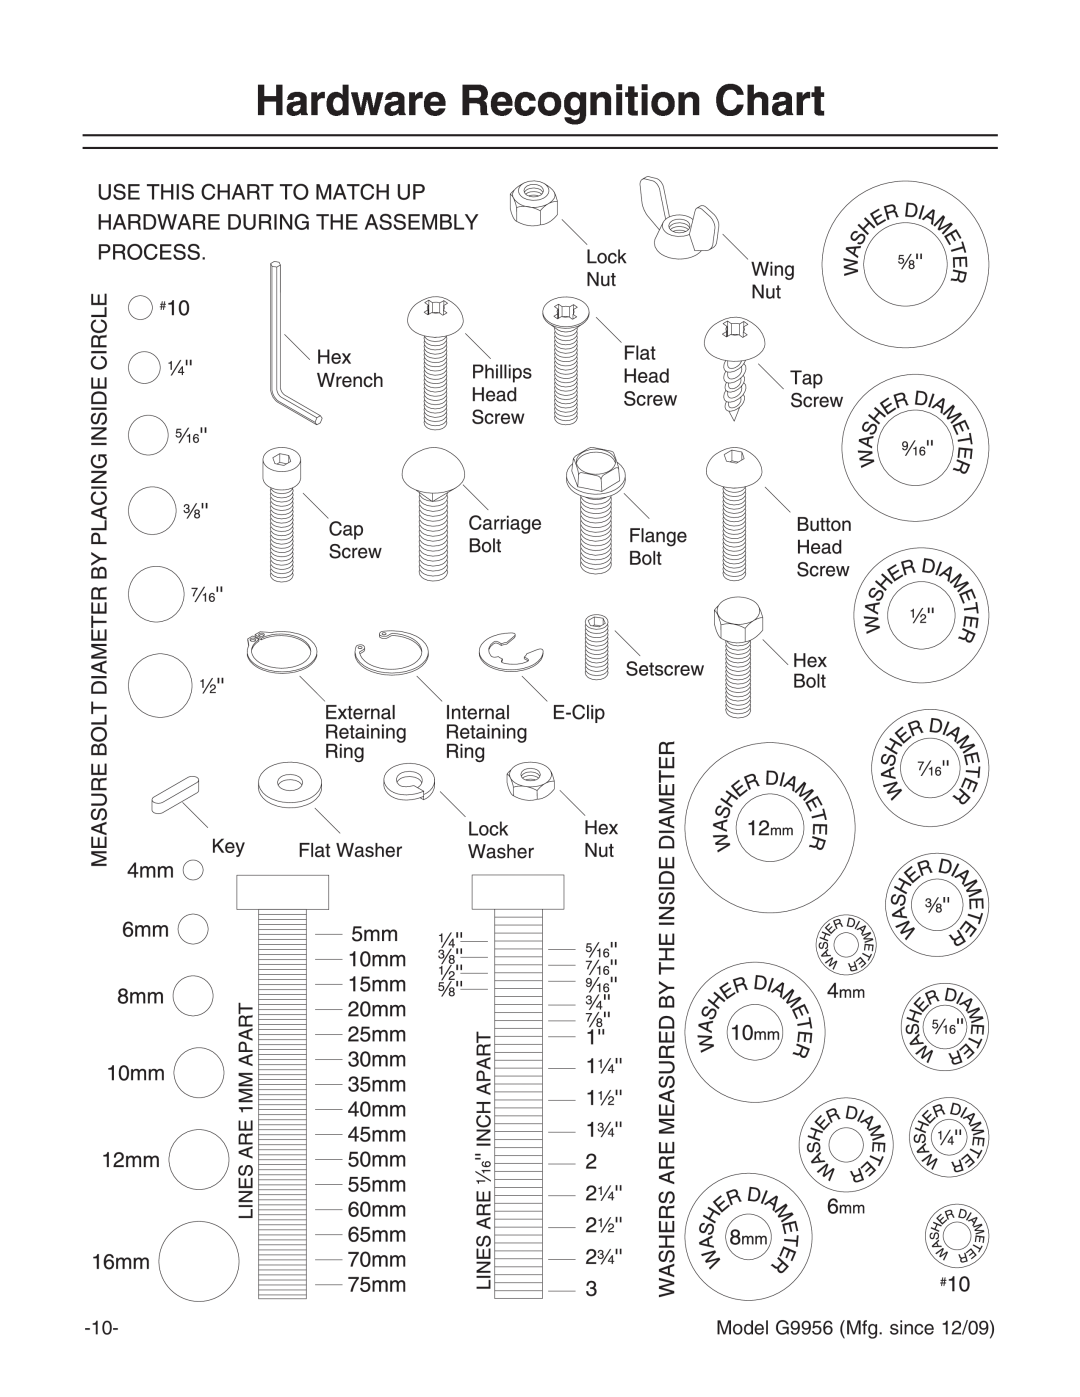 Grizzly instruction manual Hardware Recognition Chart, Model G9956 Mfg. since 12/09 